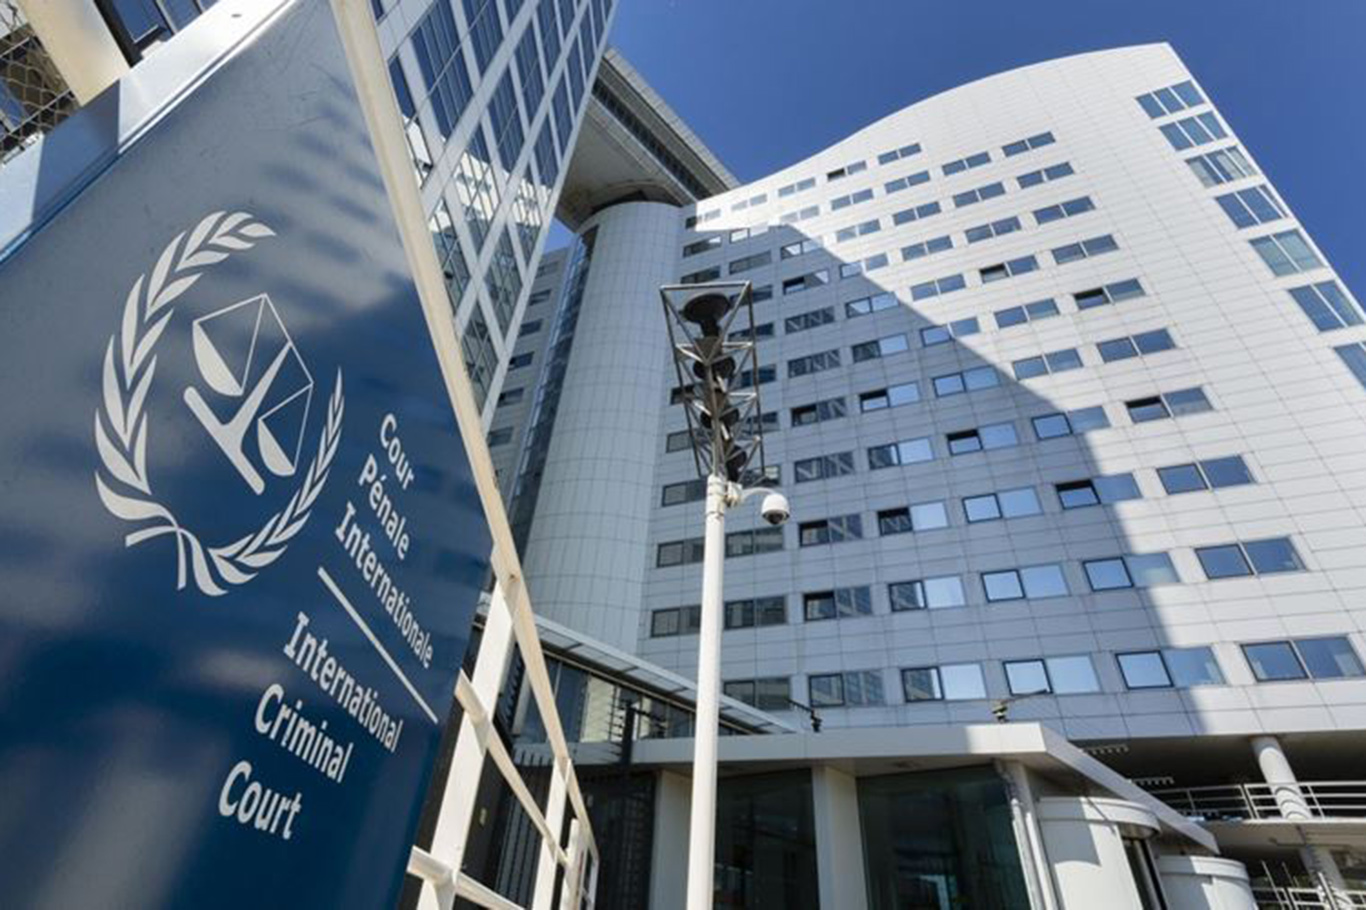 198 NGOs ask ICC to probe and curb zionist regime’s violation